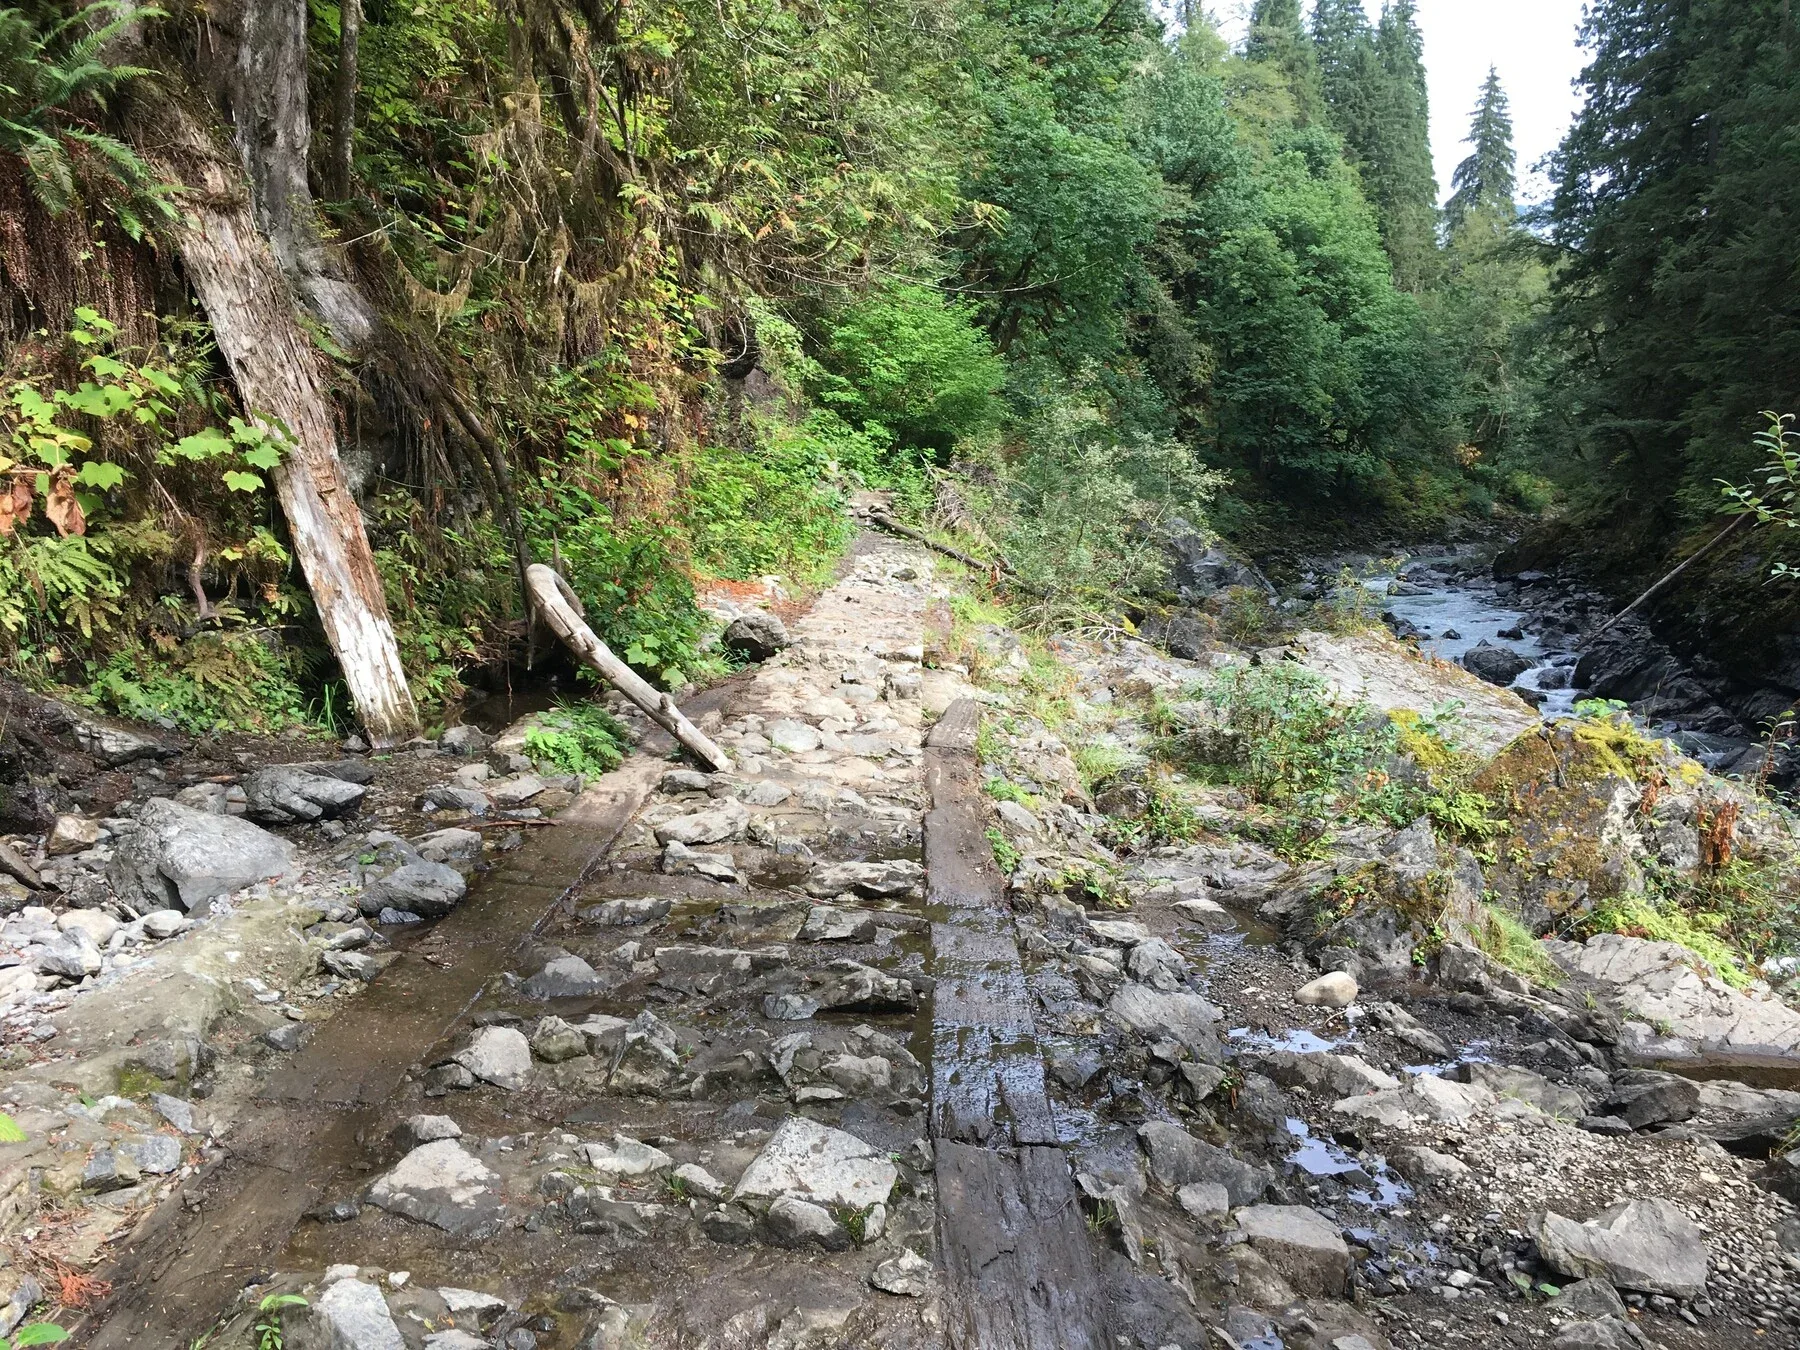 +375 Pacific Northwest Trails Reference Photos - Vol 2